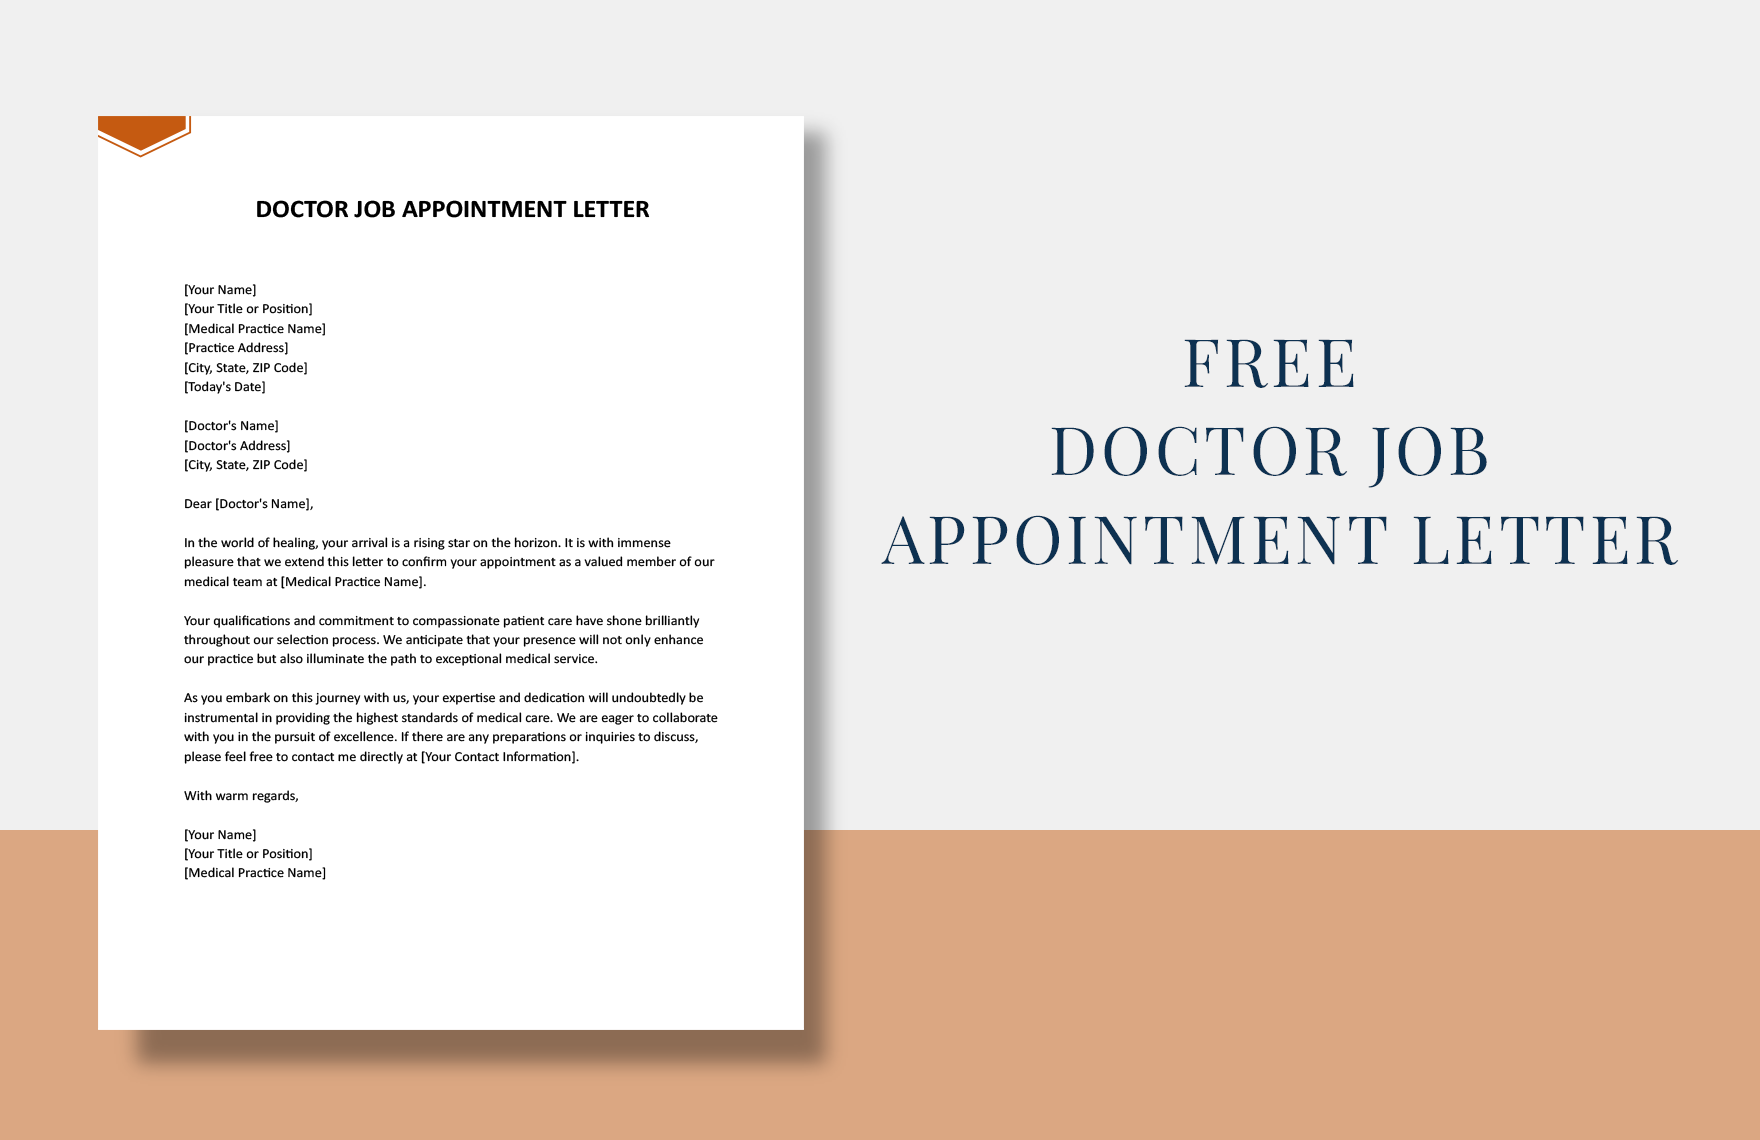 Doctor Job Appointment Letter